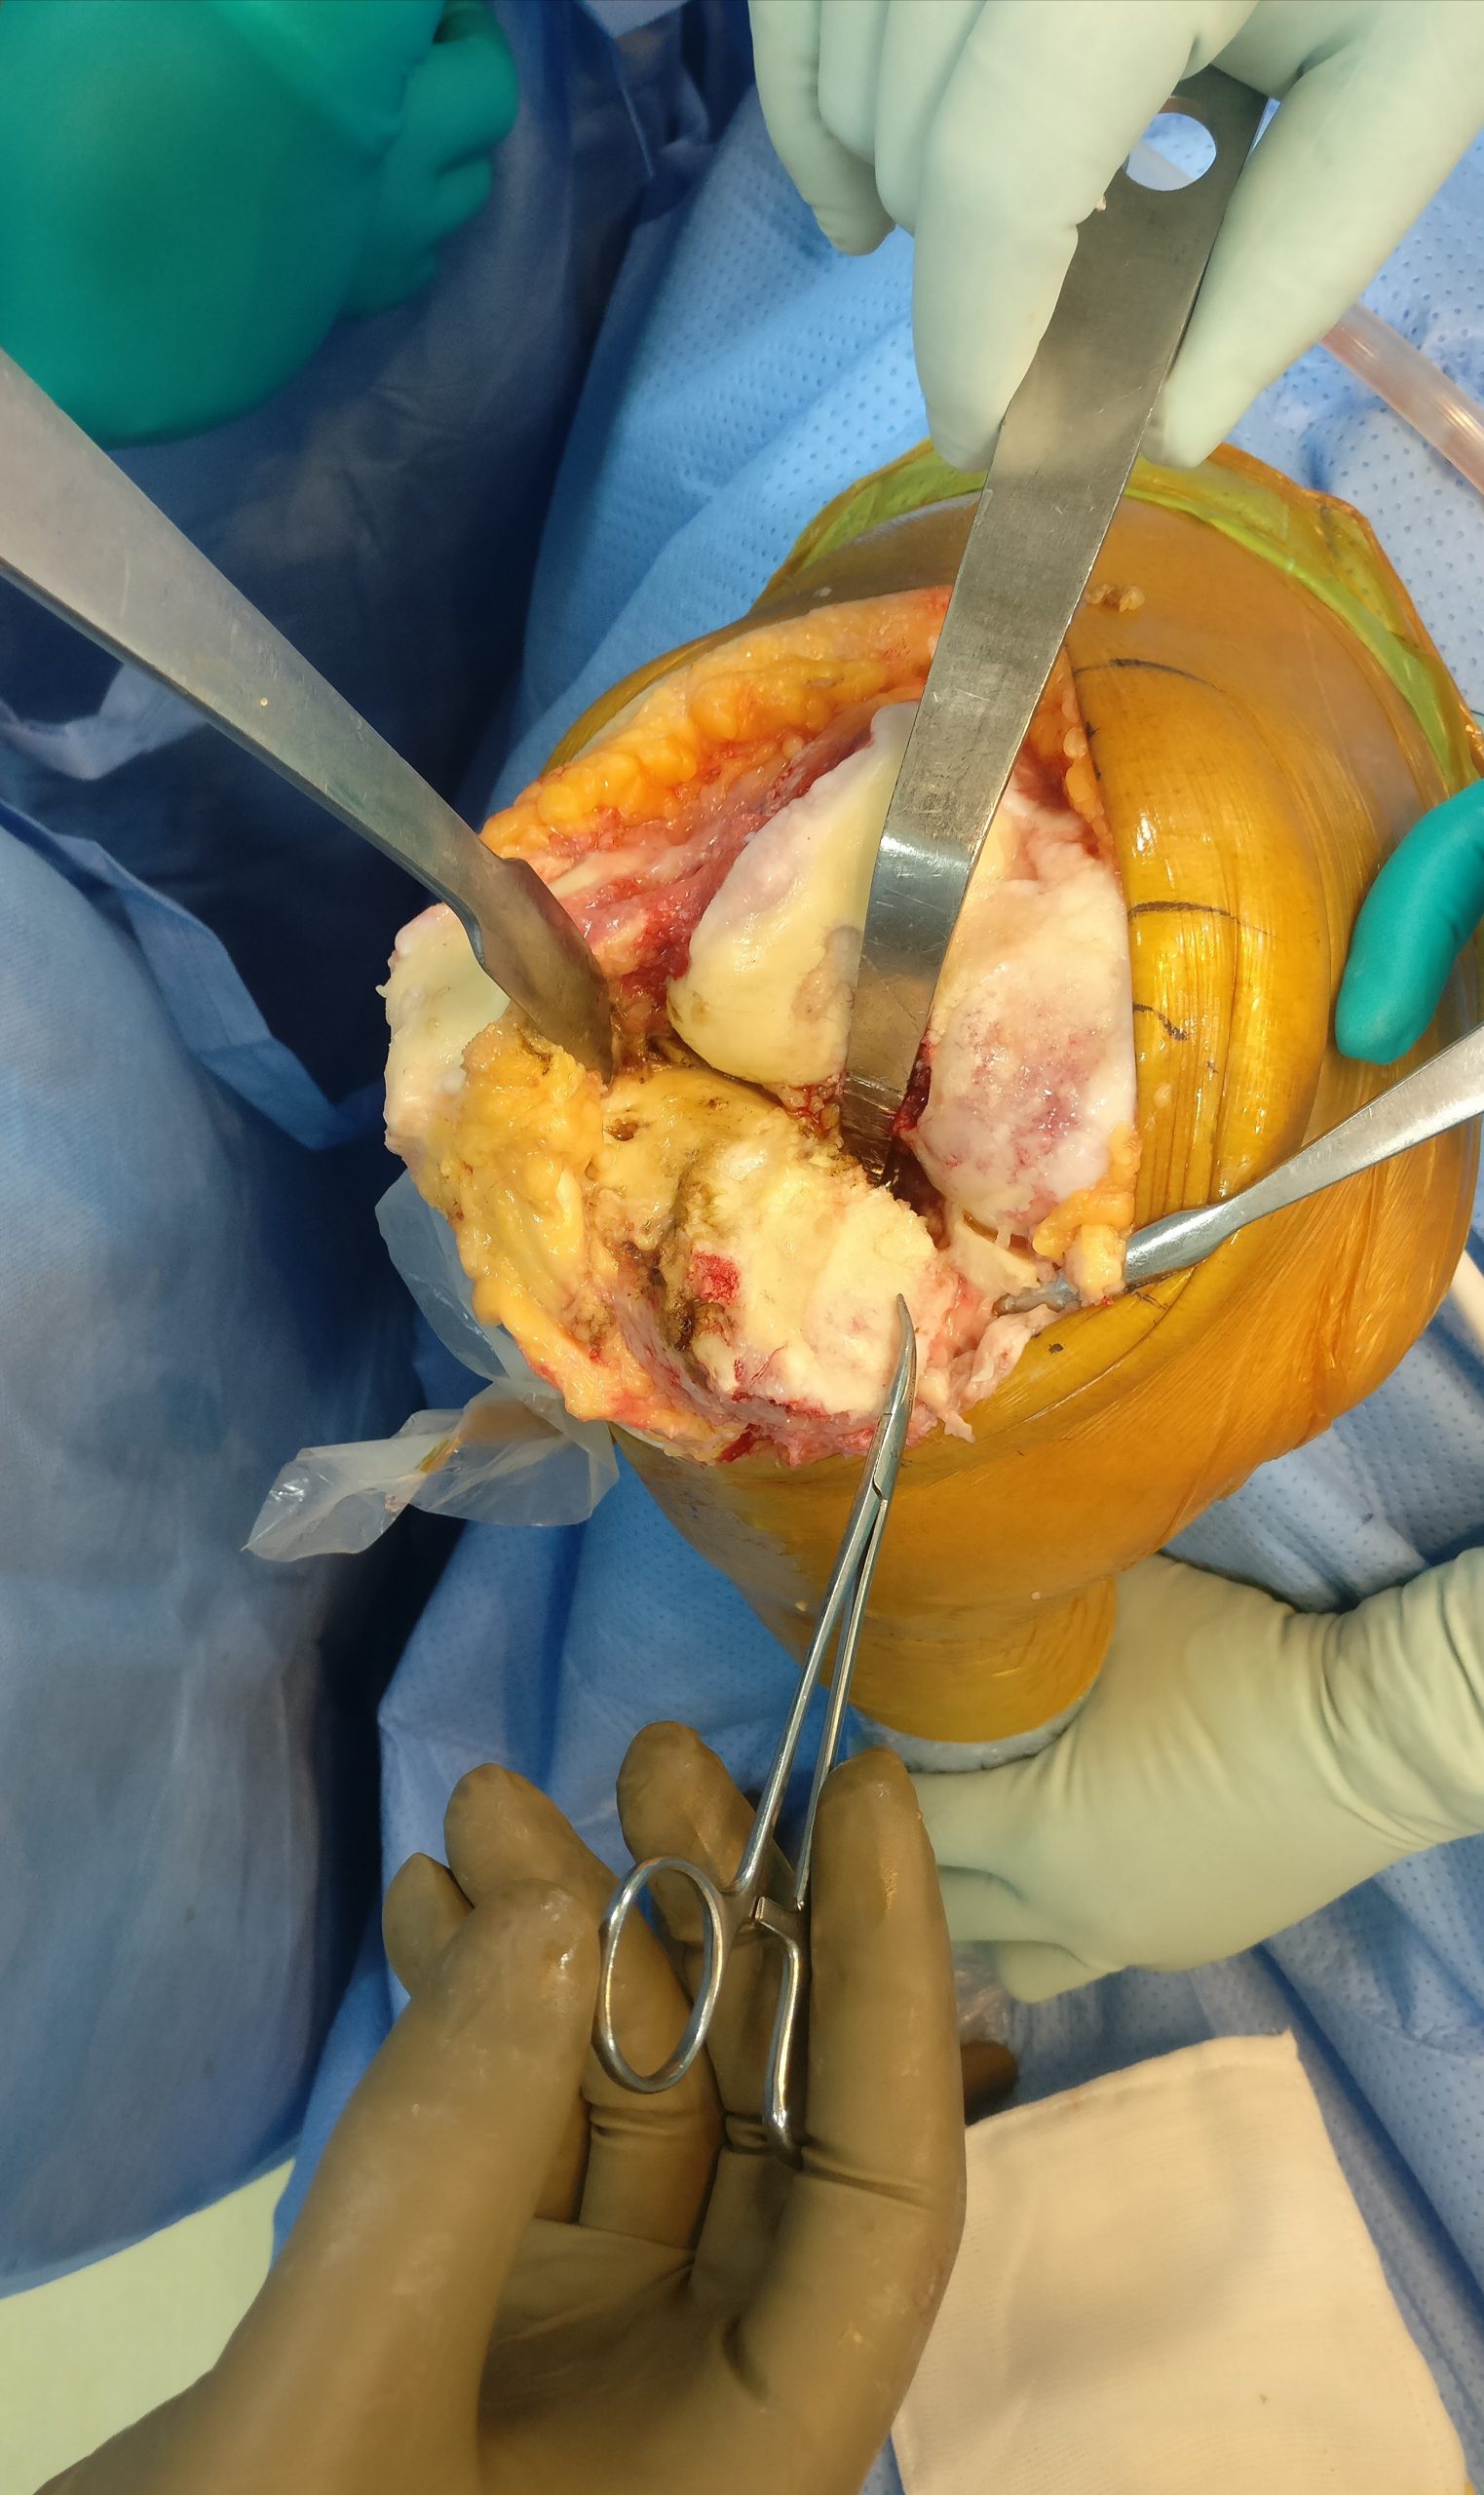 A knee replacement surgery